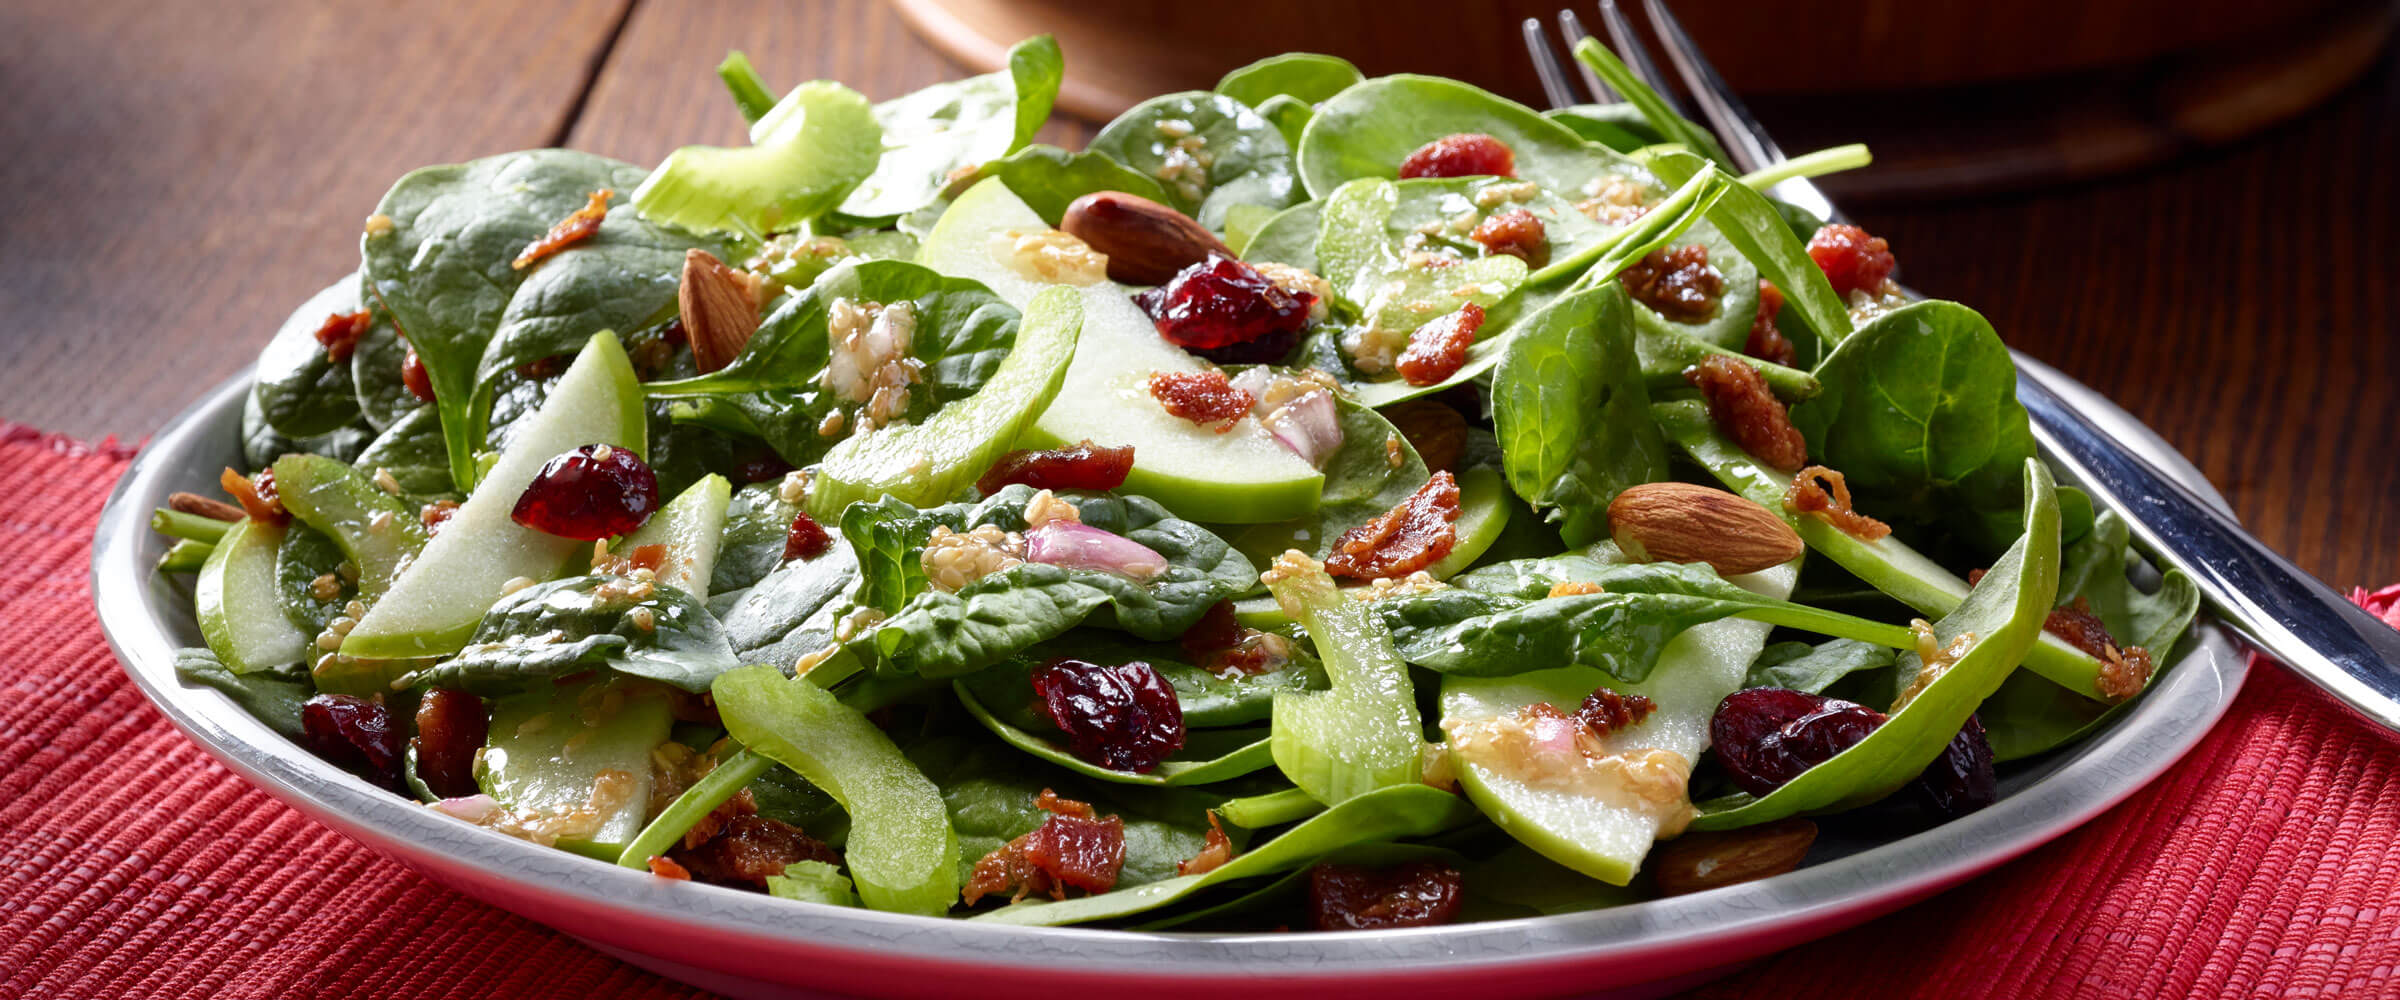 Cranberry Almond Bacon Salad with apples on plate on red placemat